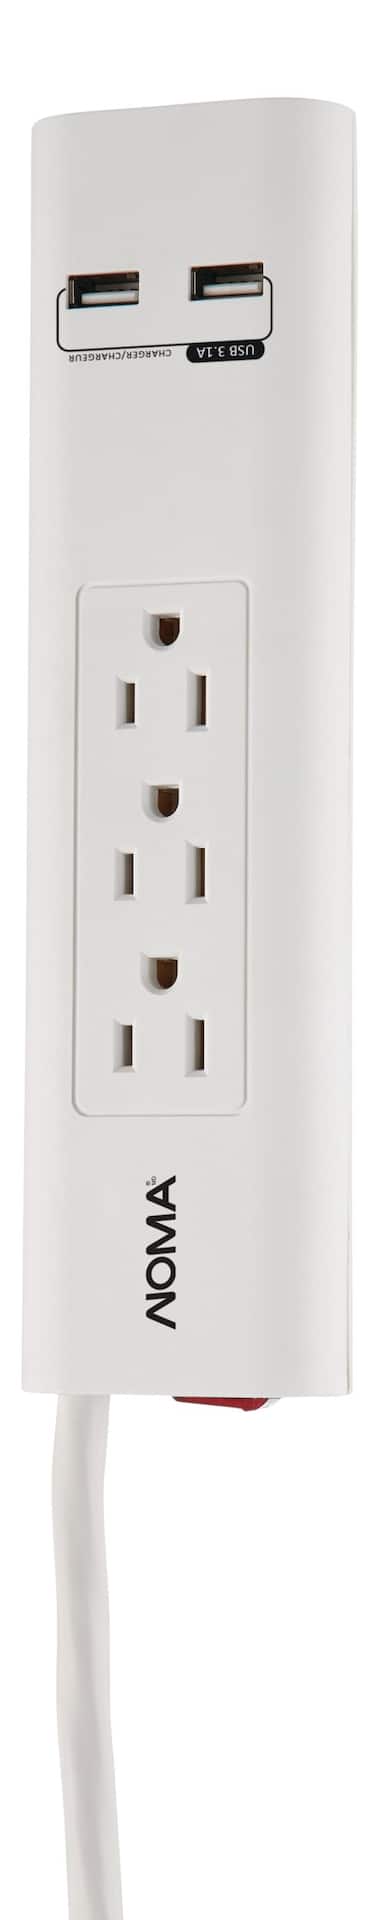 NOMA 3-Outlet and 2 USB Port Power Bar with Surge Protector, 4-ft Cord ...